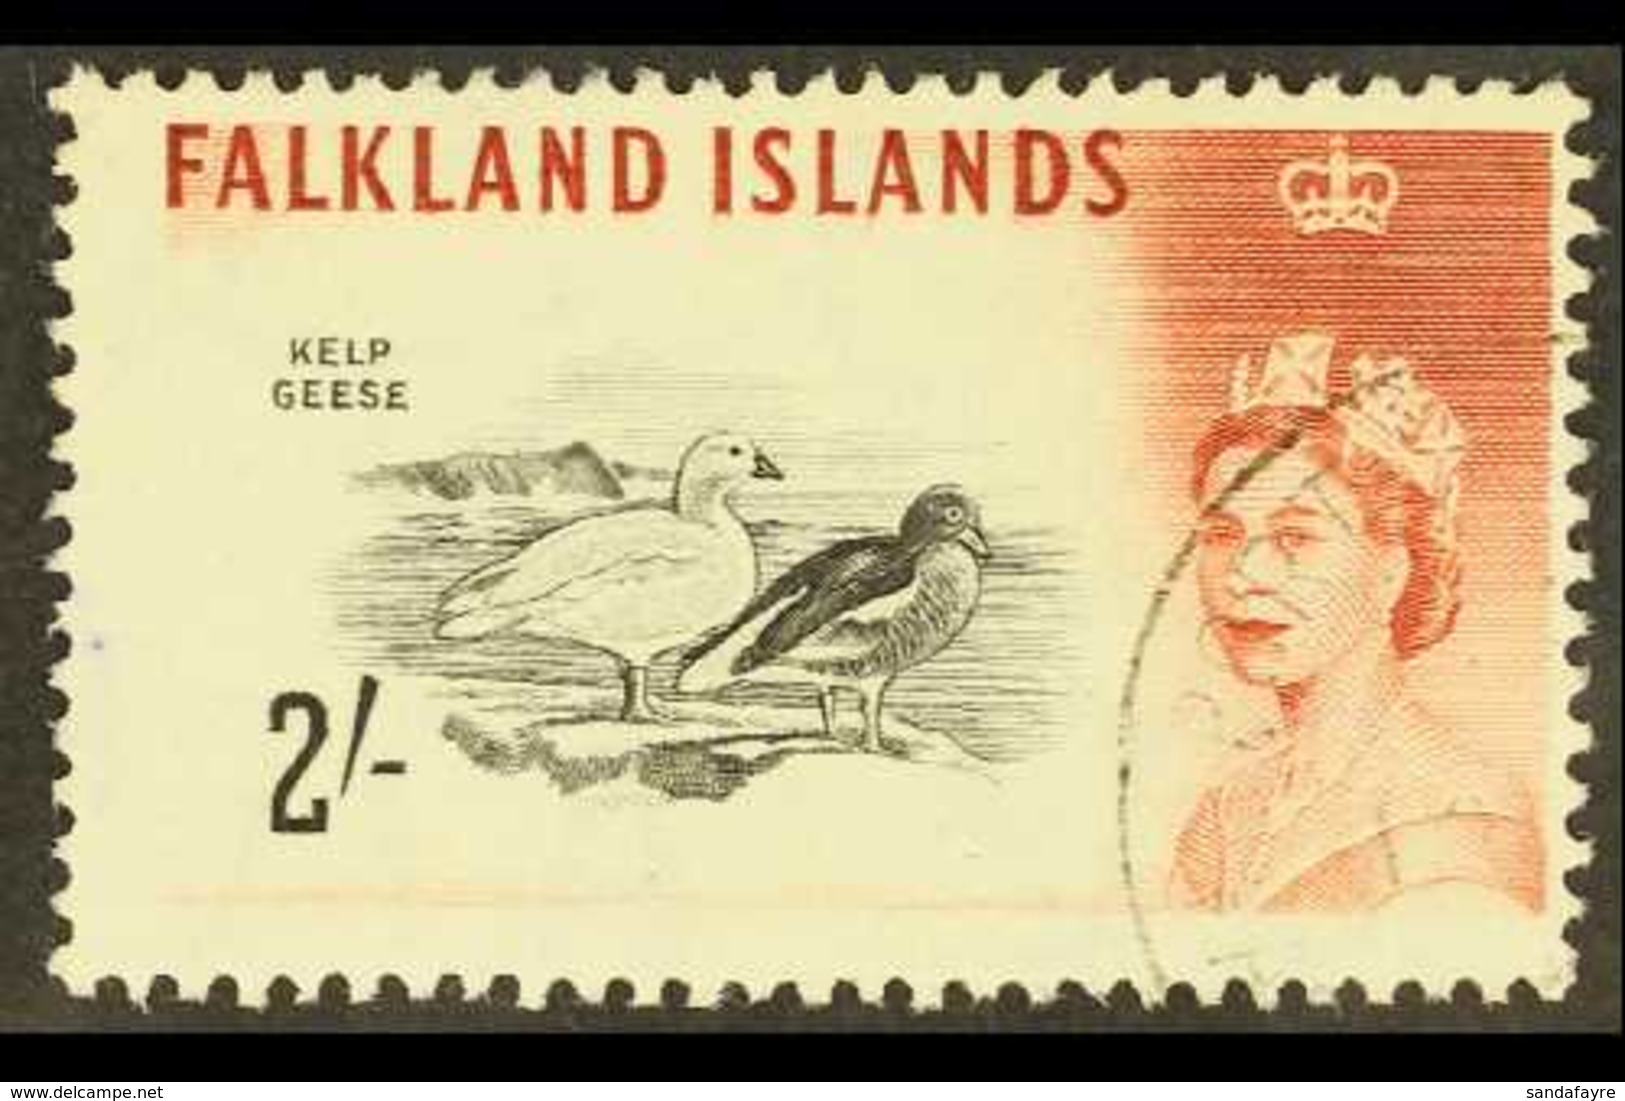 1960-66 QEII Definitive 2s Black And Lake-brown (D.L.R.), SG 204a, Very Fine Used. For More Images, Please Visit Http:// - Falklandeilanden